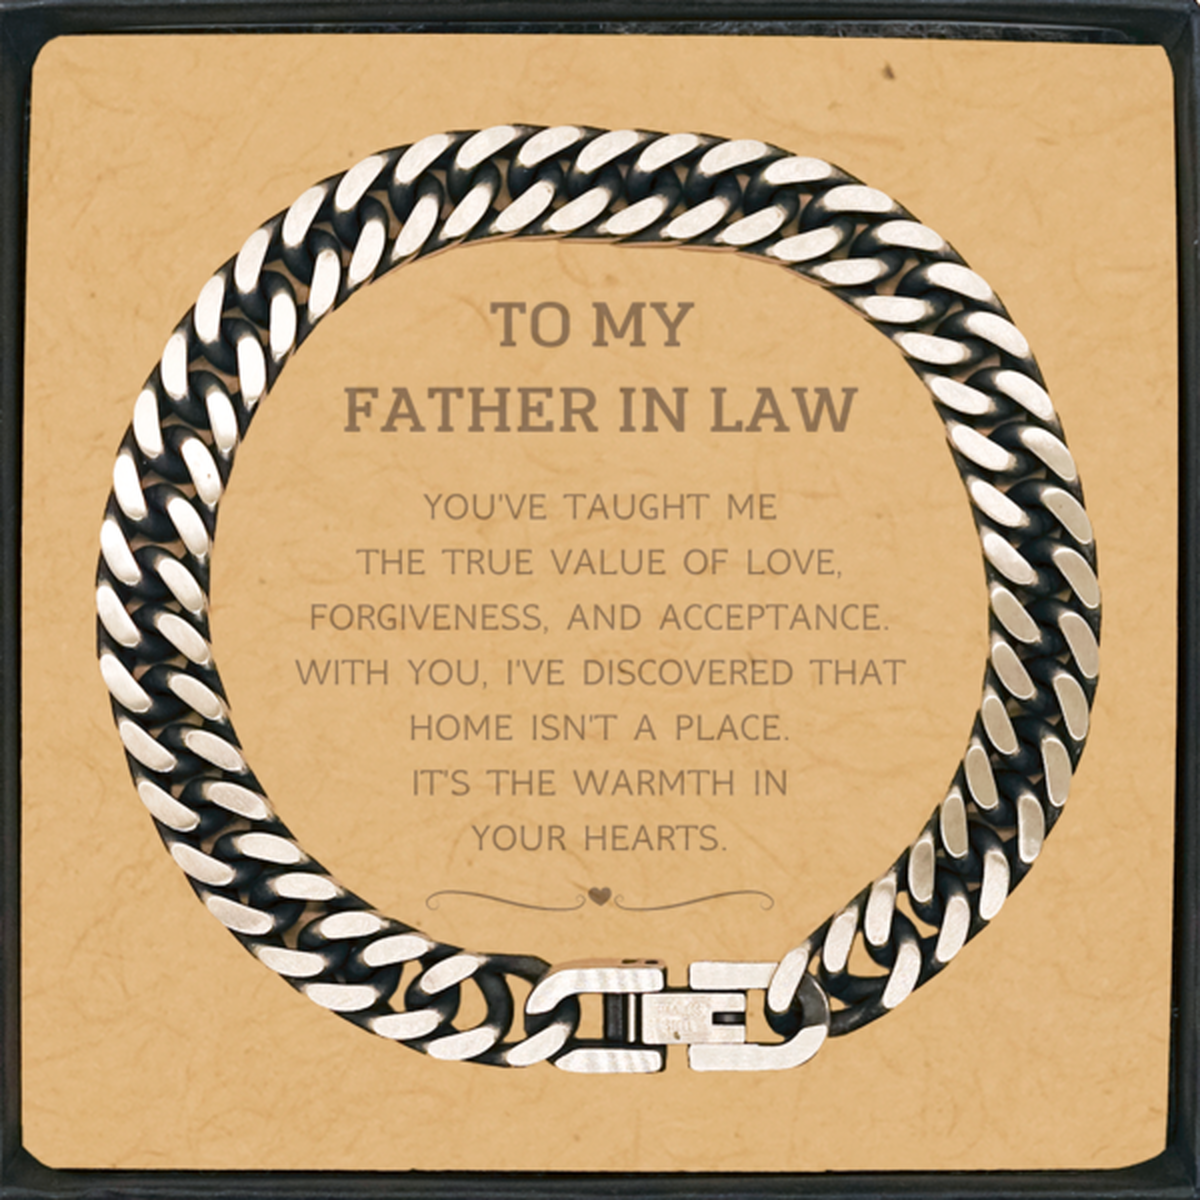 To My Father In Law Gifts, You've taught me the true value of love, Thank You Gifts For Father In Law, Birthday Cuban Link Chain Bracelet For Father In Law